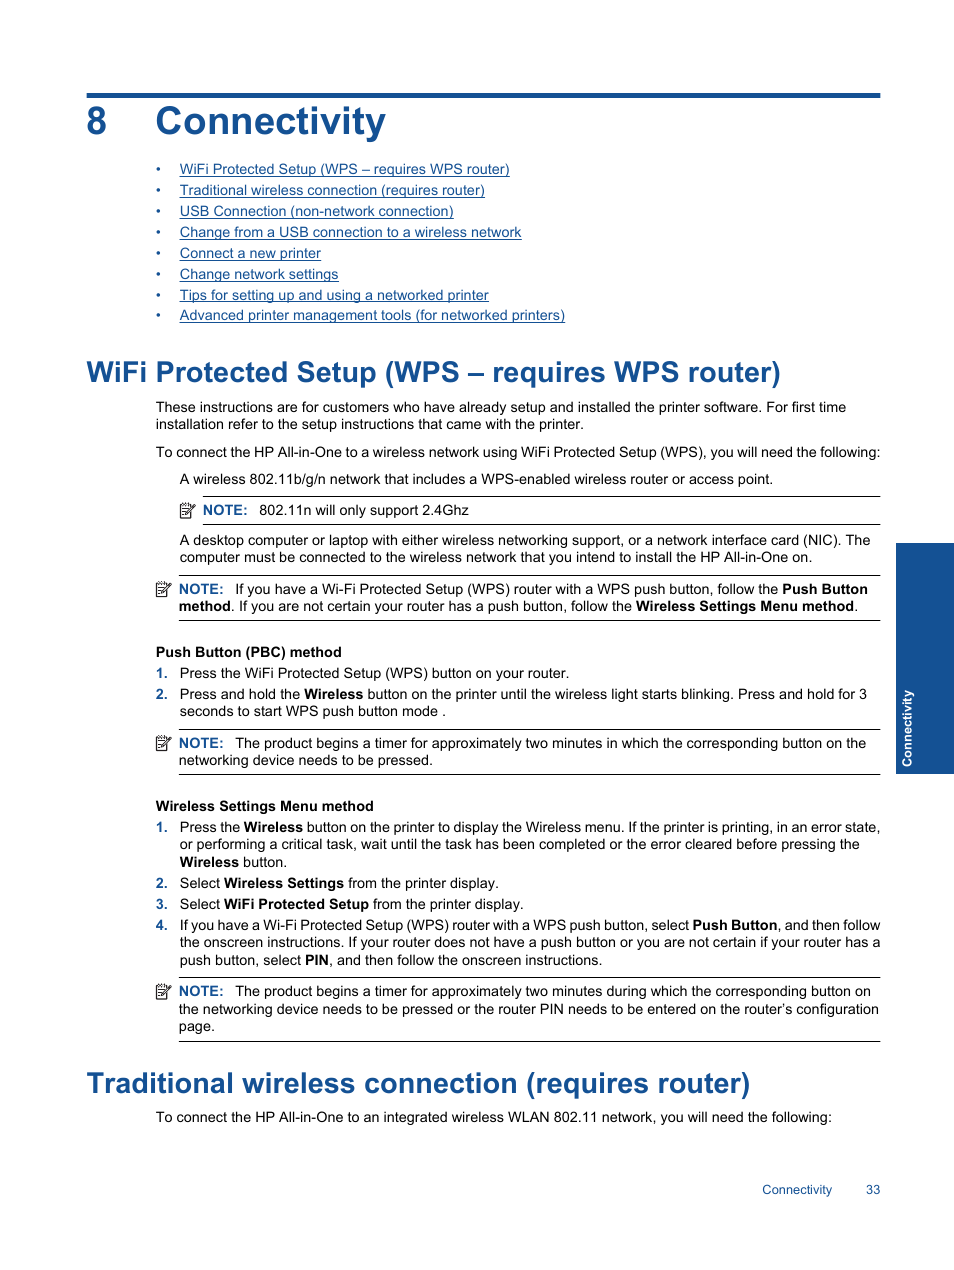 Connectivity, Wifi protected setup (wps – requires wps router), Traditional  wireless connection (requires router) | HP 3070 B611 User Manual | Page 35  / 60